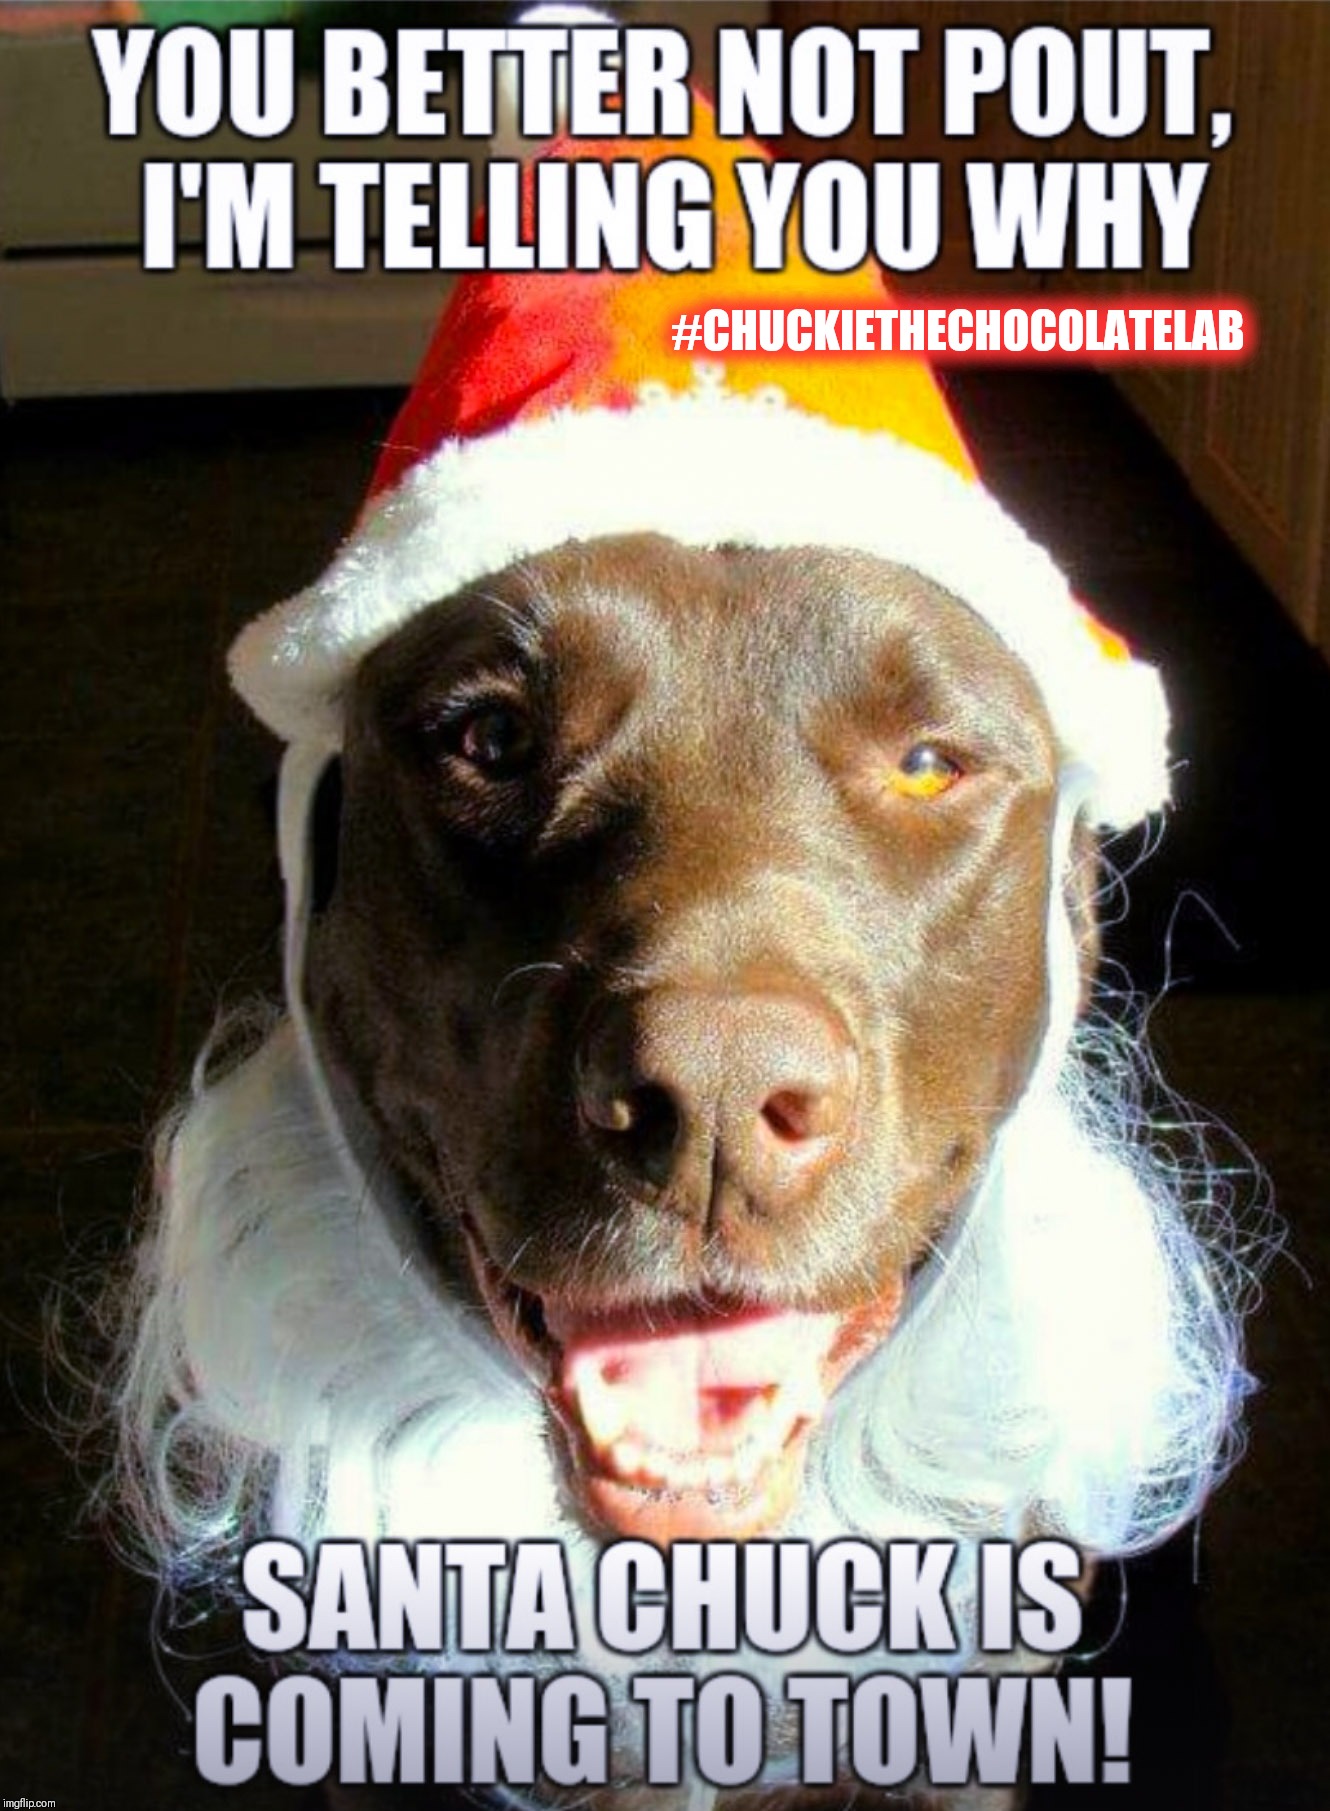 You better not pout | #CHUCKIETHECHOCOLATELAB | image tagged in chuckie the chocolate lab,dogs,funny,santa,christmas,memes | made w/ Imgflip meme maker